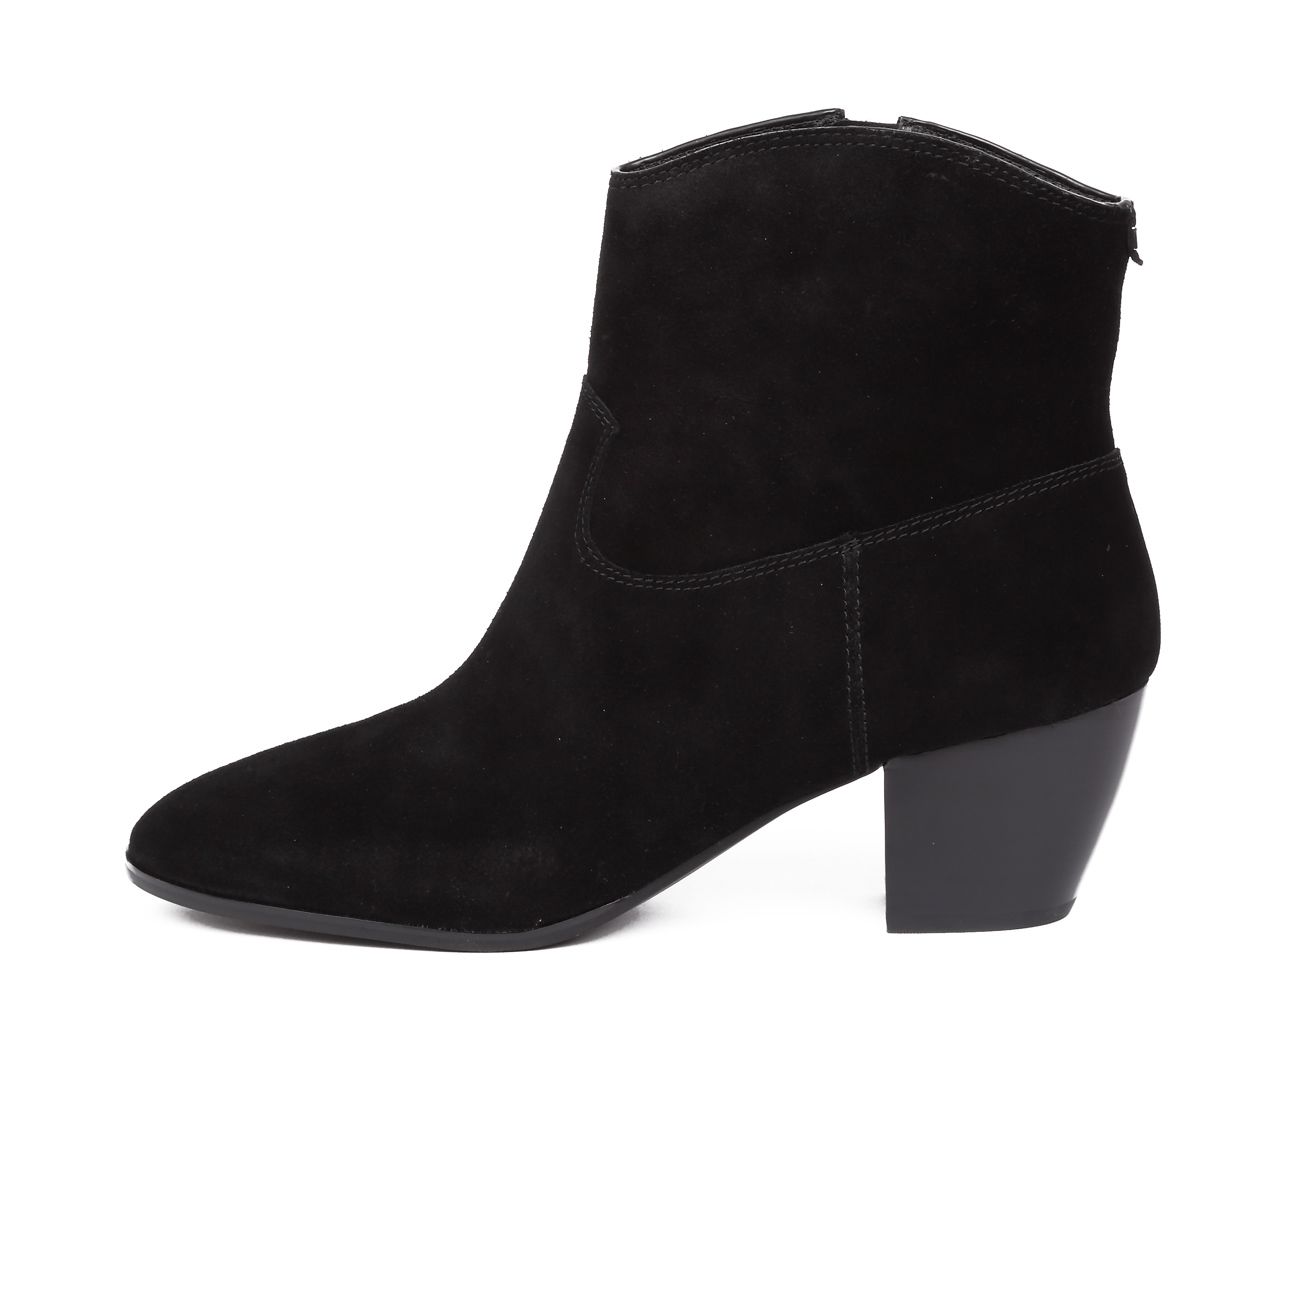 michael kors avery suede boot